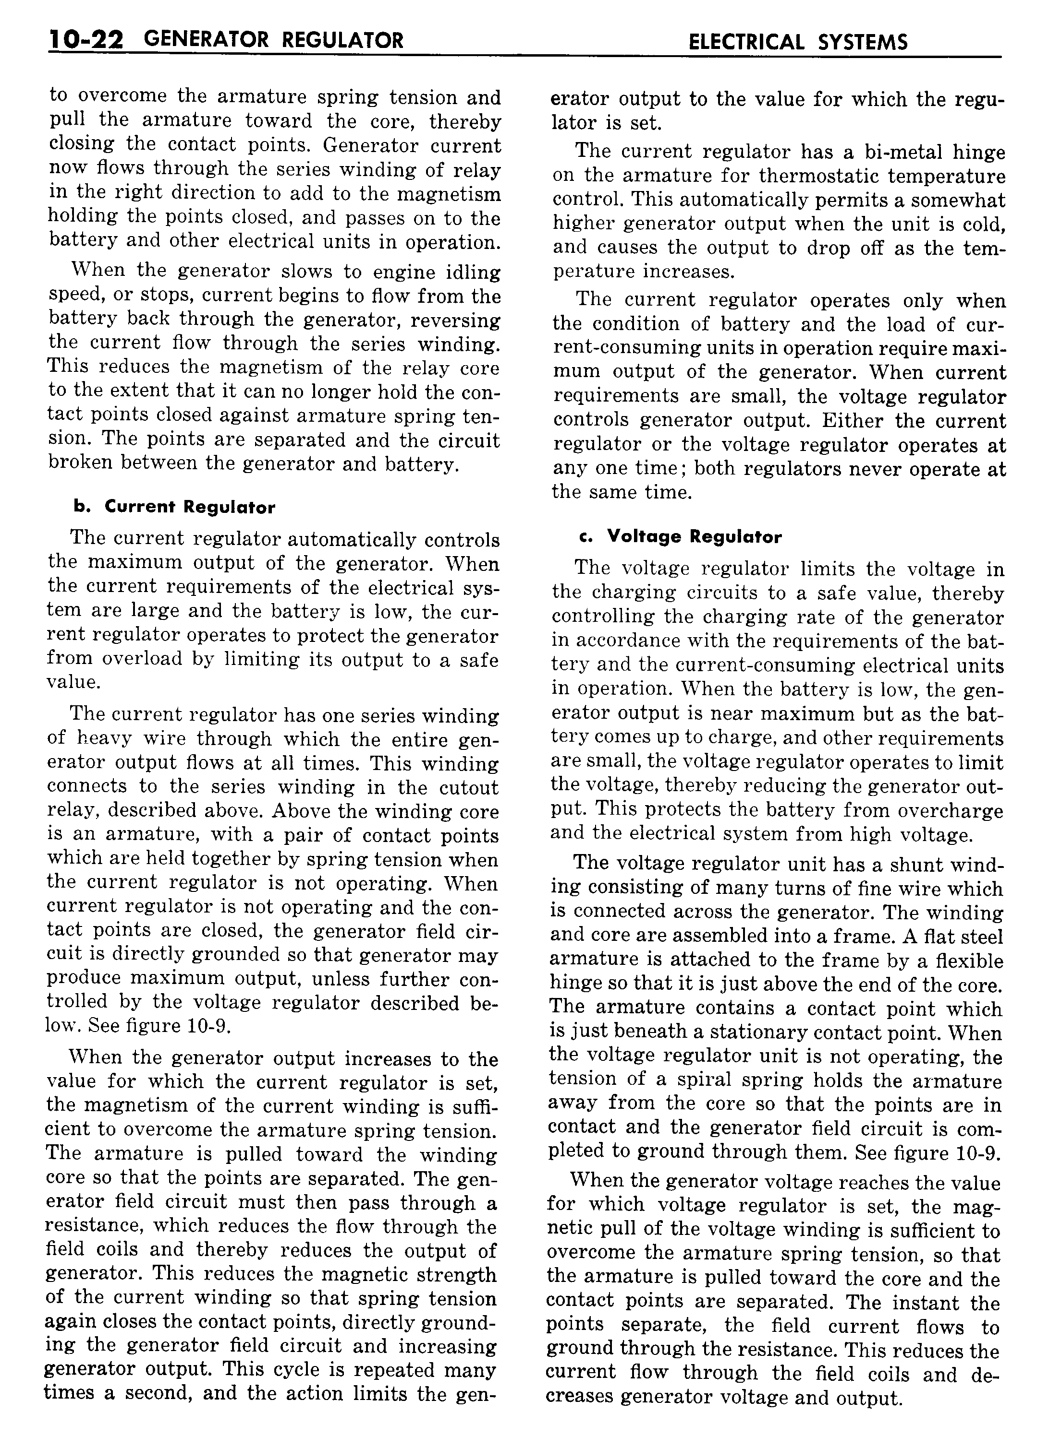 n_11 1957 Buick Shop Manual - Electrical Systems-022-022.jpg